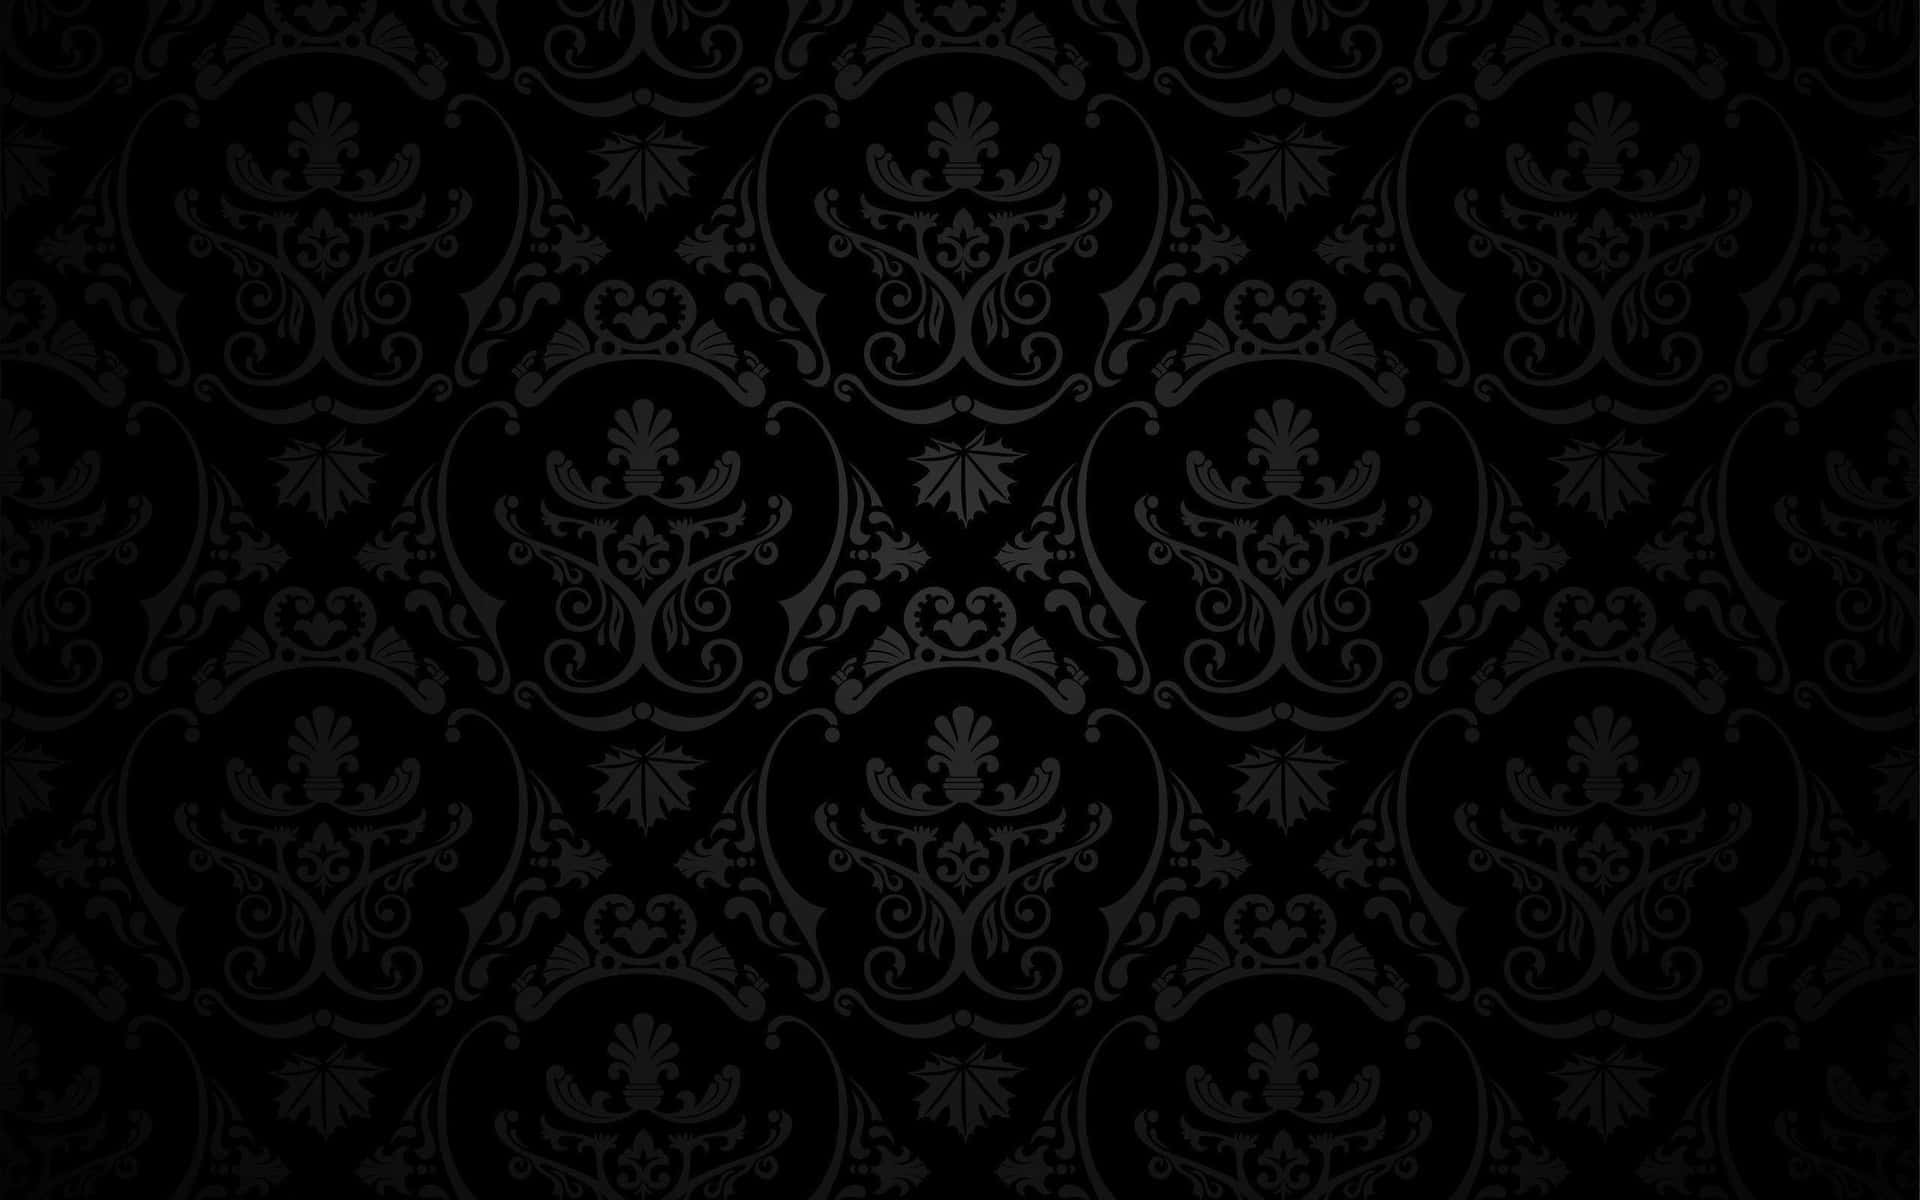 Light Up the Night with Pretty Black Wallpaper